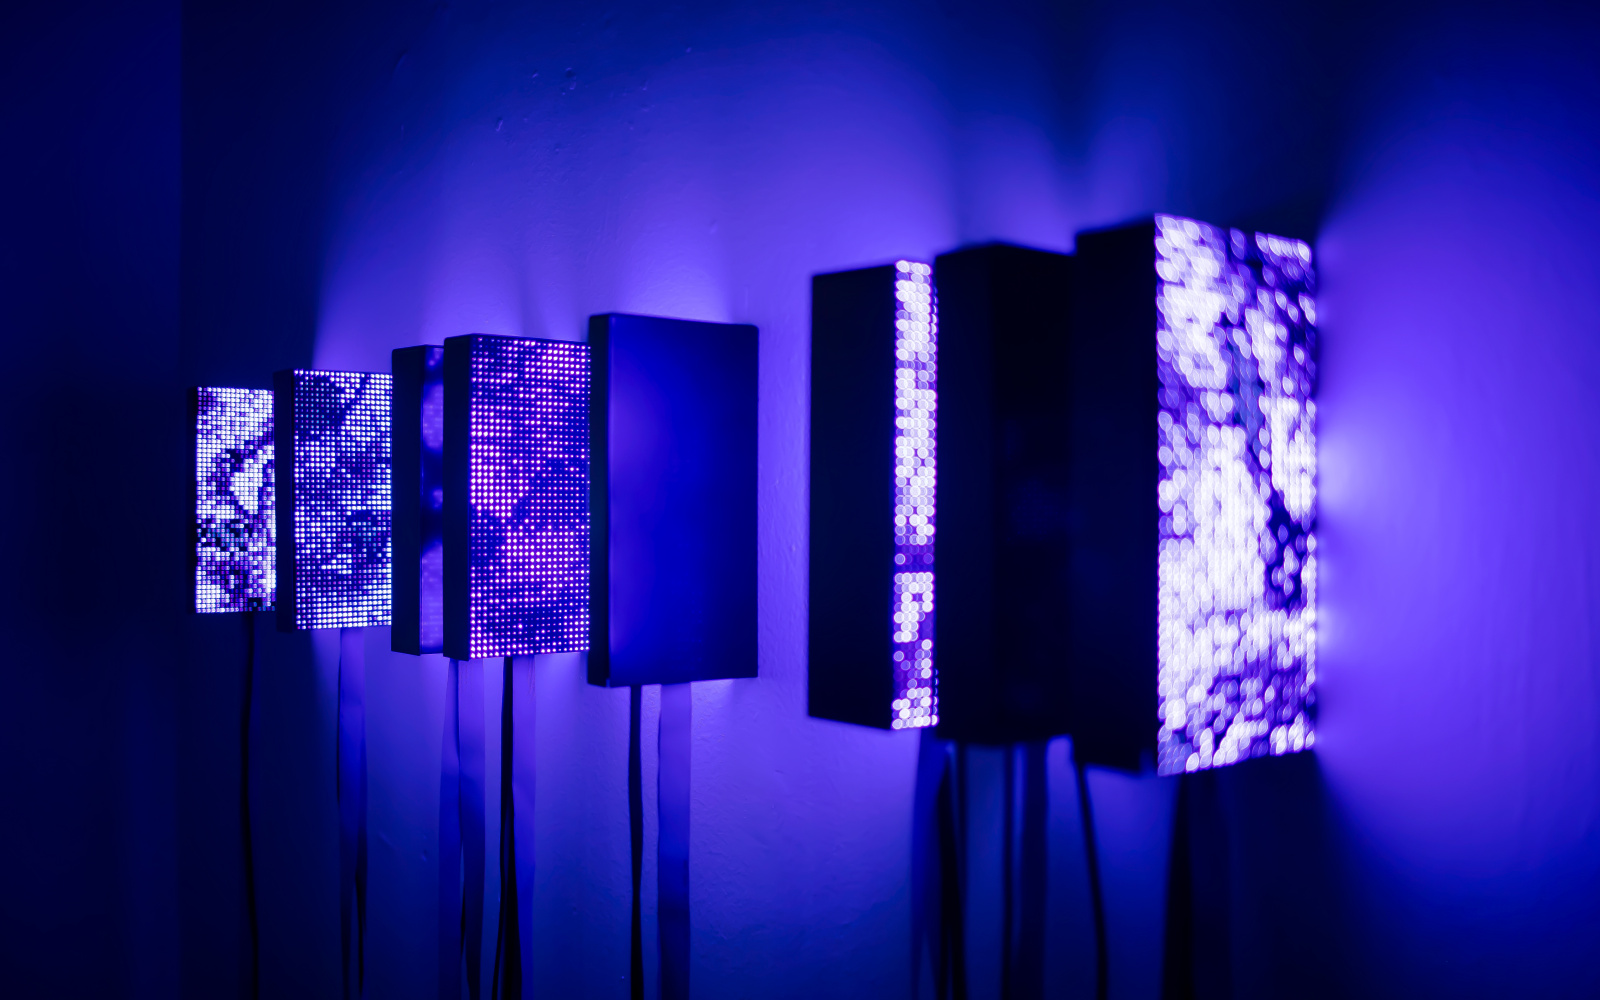 The installation consists of eight boxes hanging on the wall that seem to glow and bathe the room in a dark blue colour.